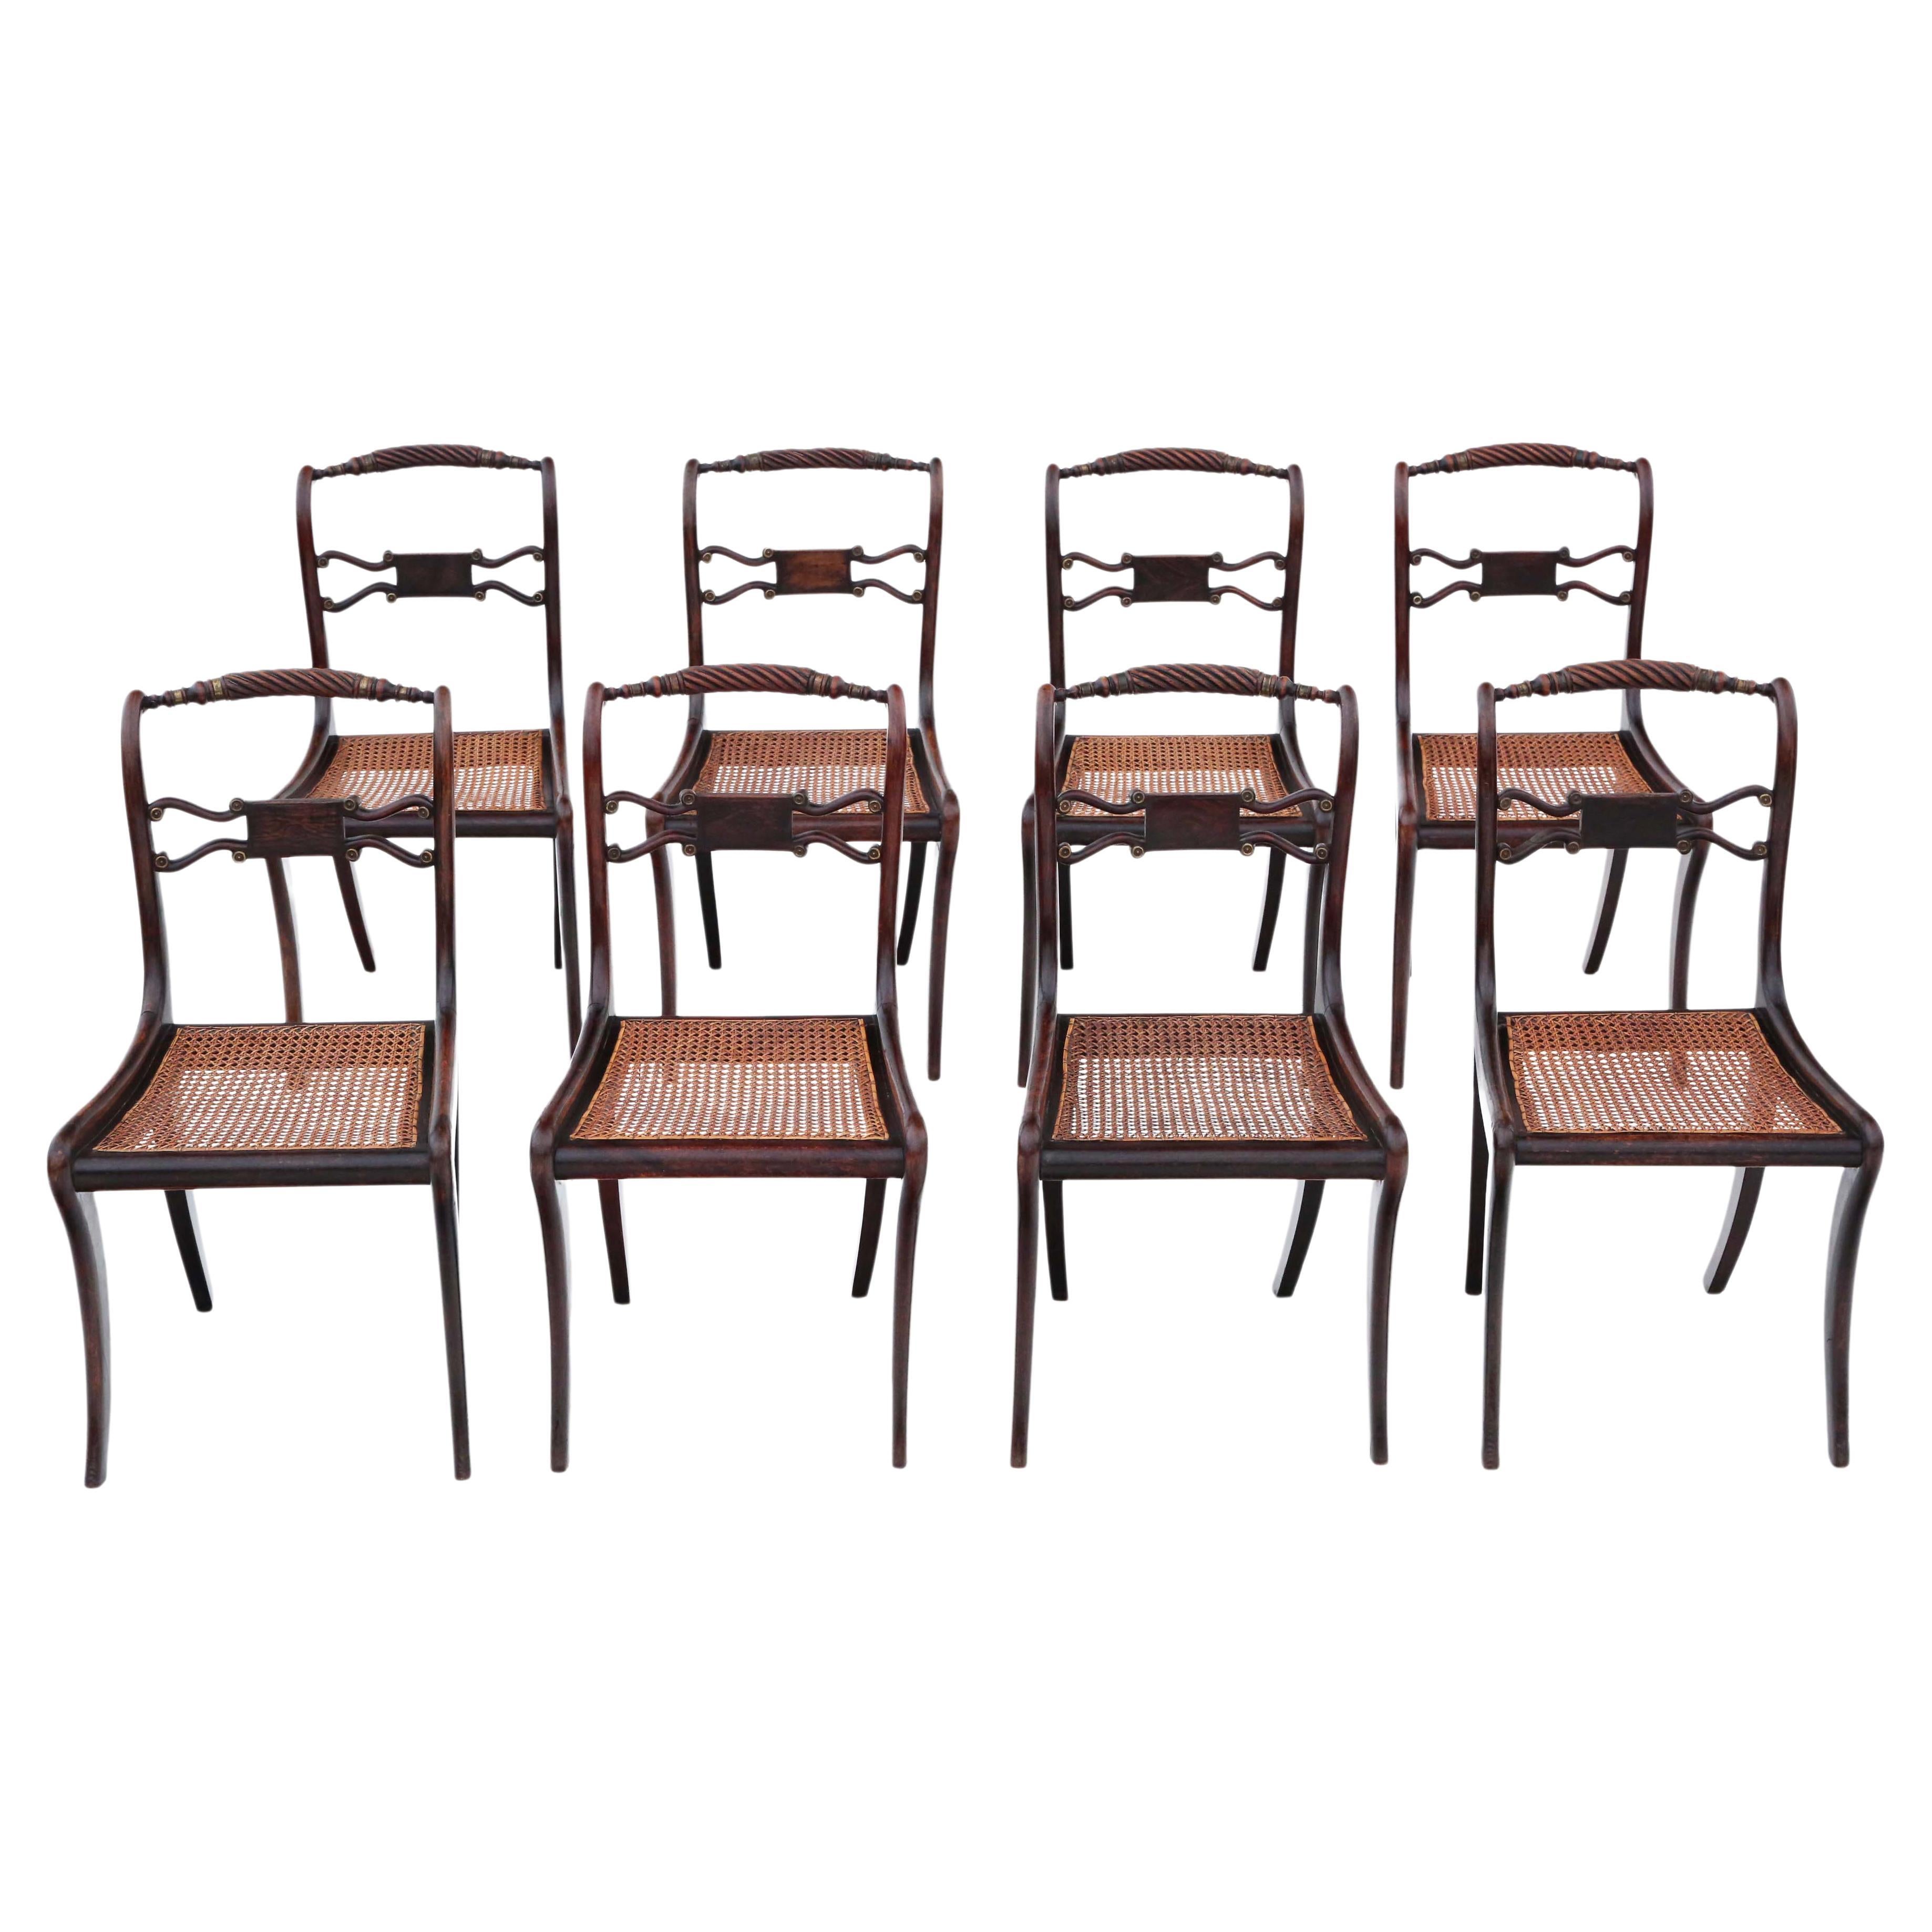 Regency Faux Rosewood Dining Chairs: Set of 8, Antique Quality, 19th Century